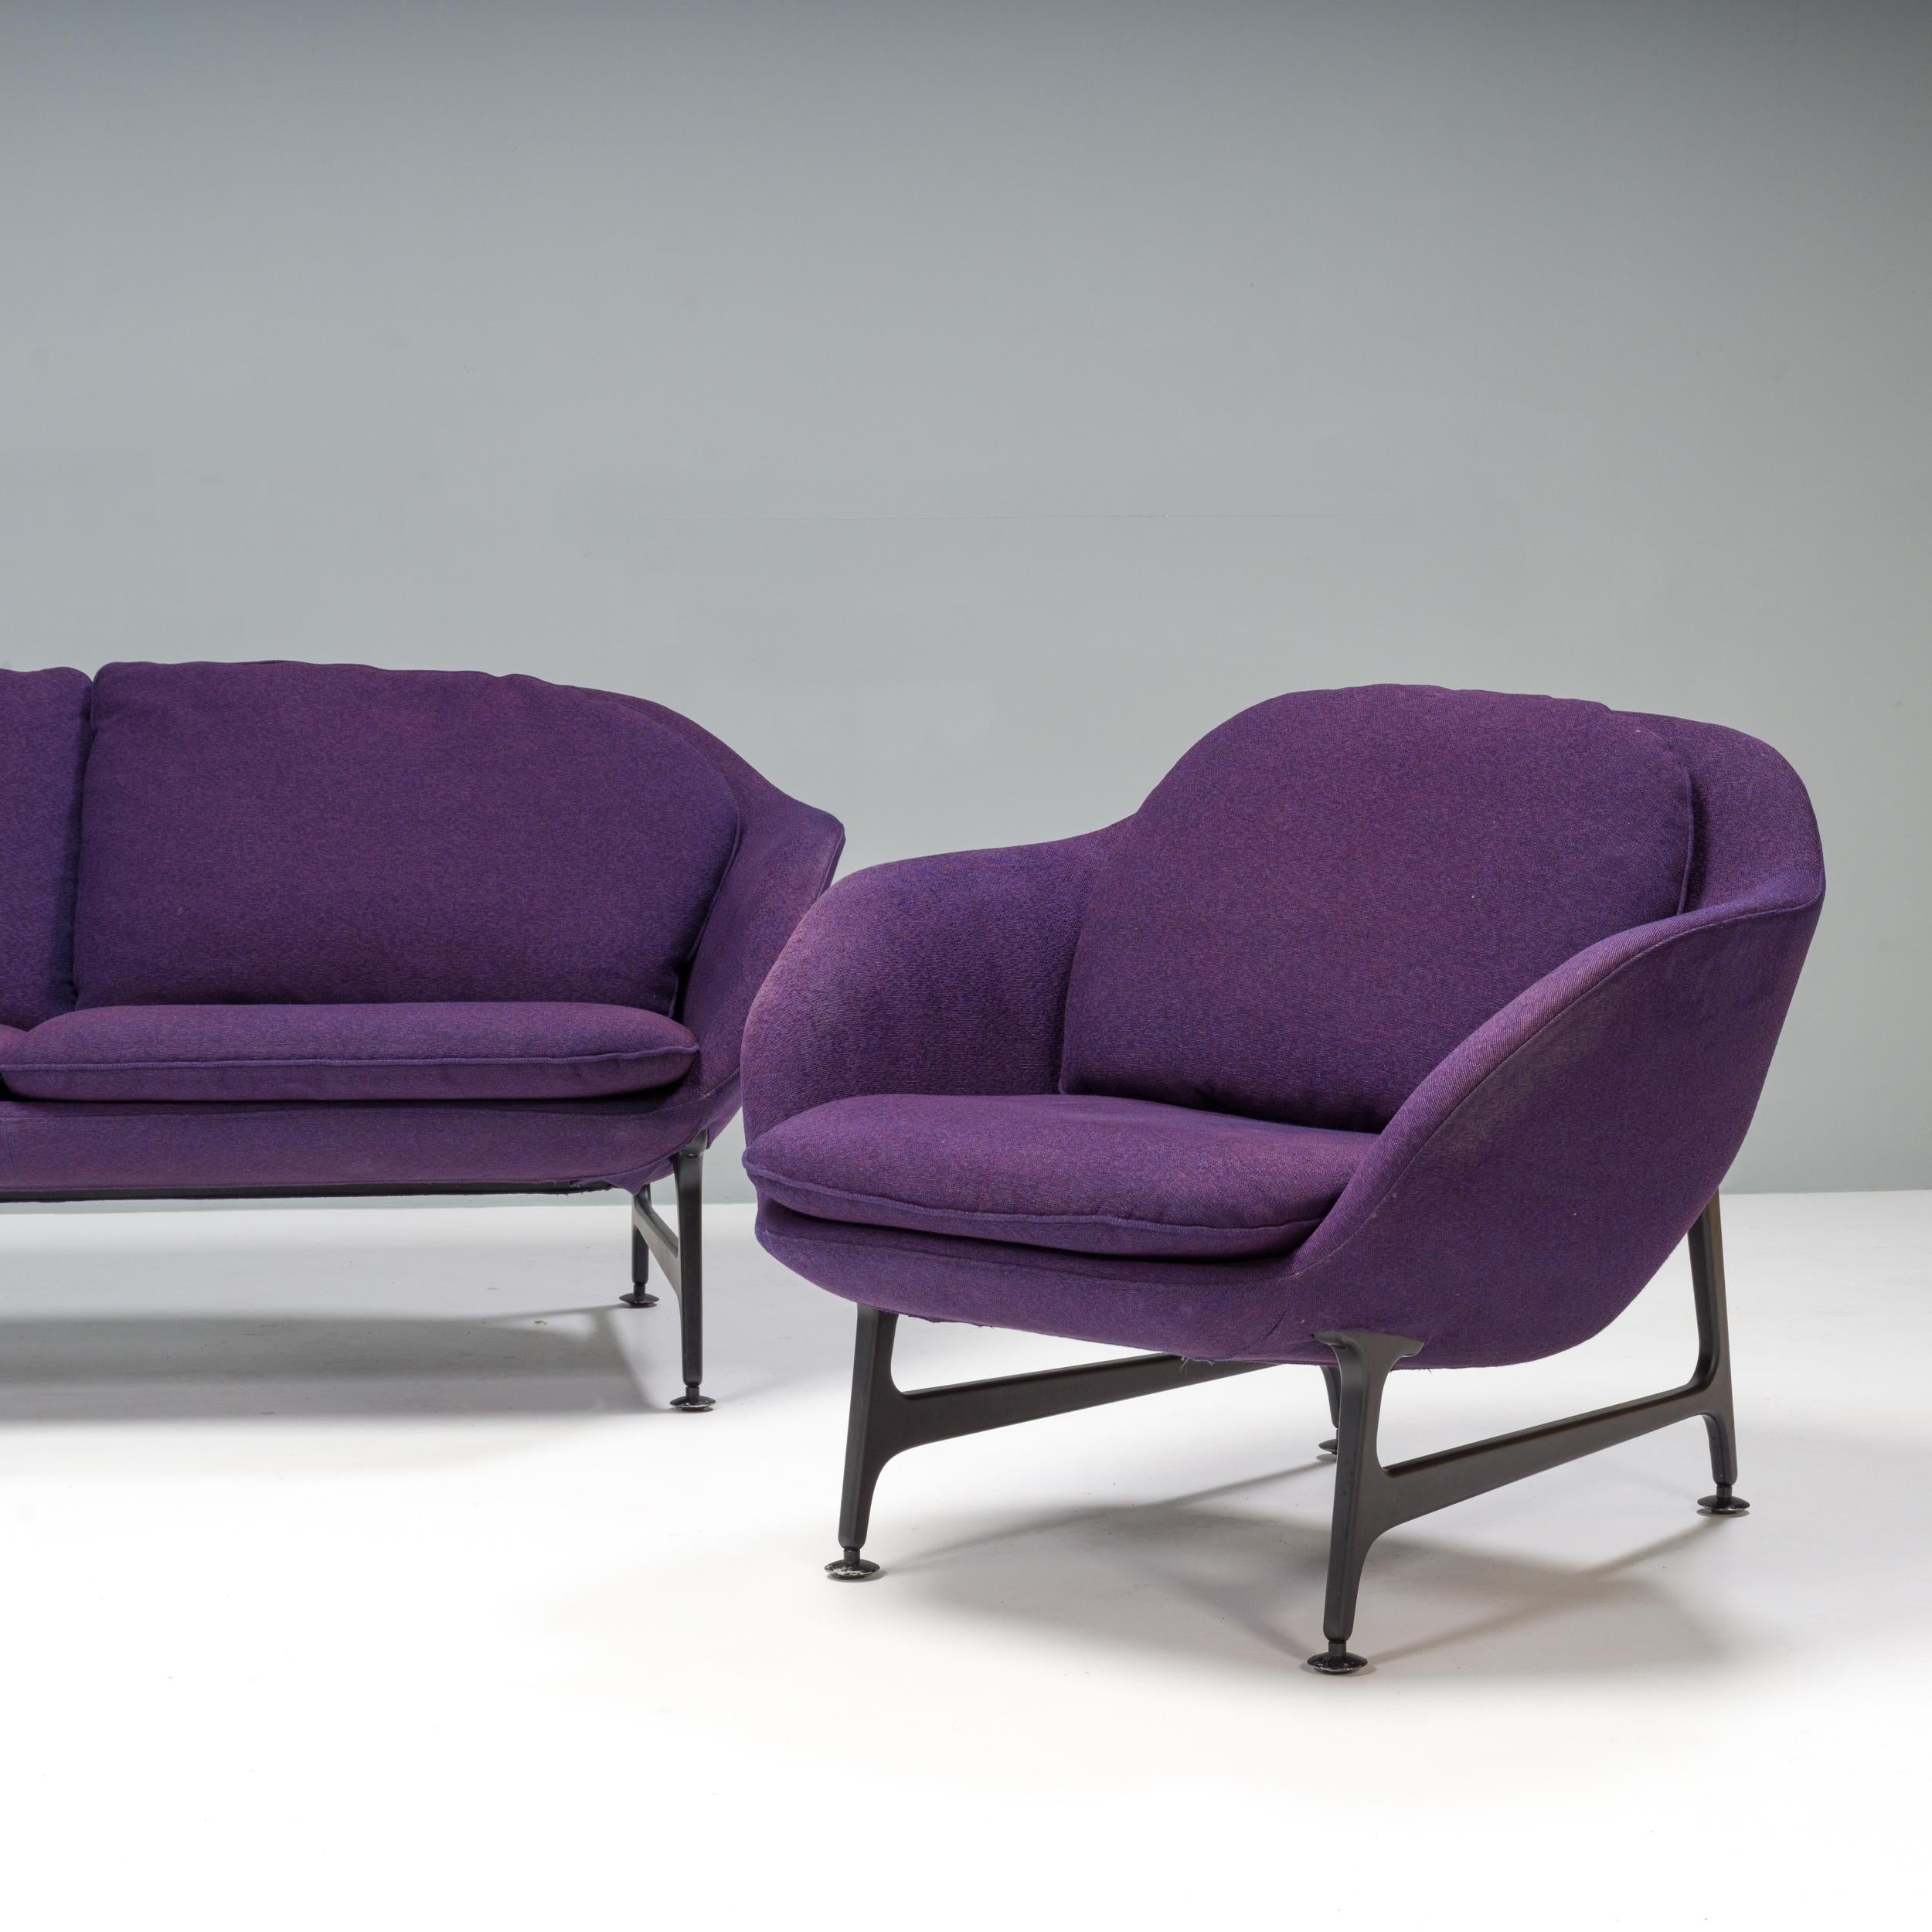 Modern Cassina by Jaime Hayon Vico Purple Sofa and Armchairs, Set of 3 For Sale